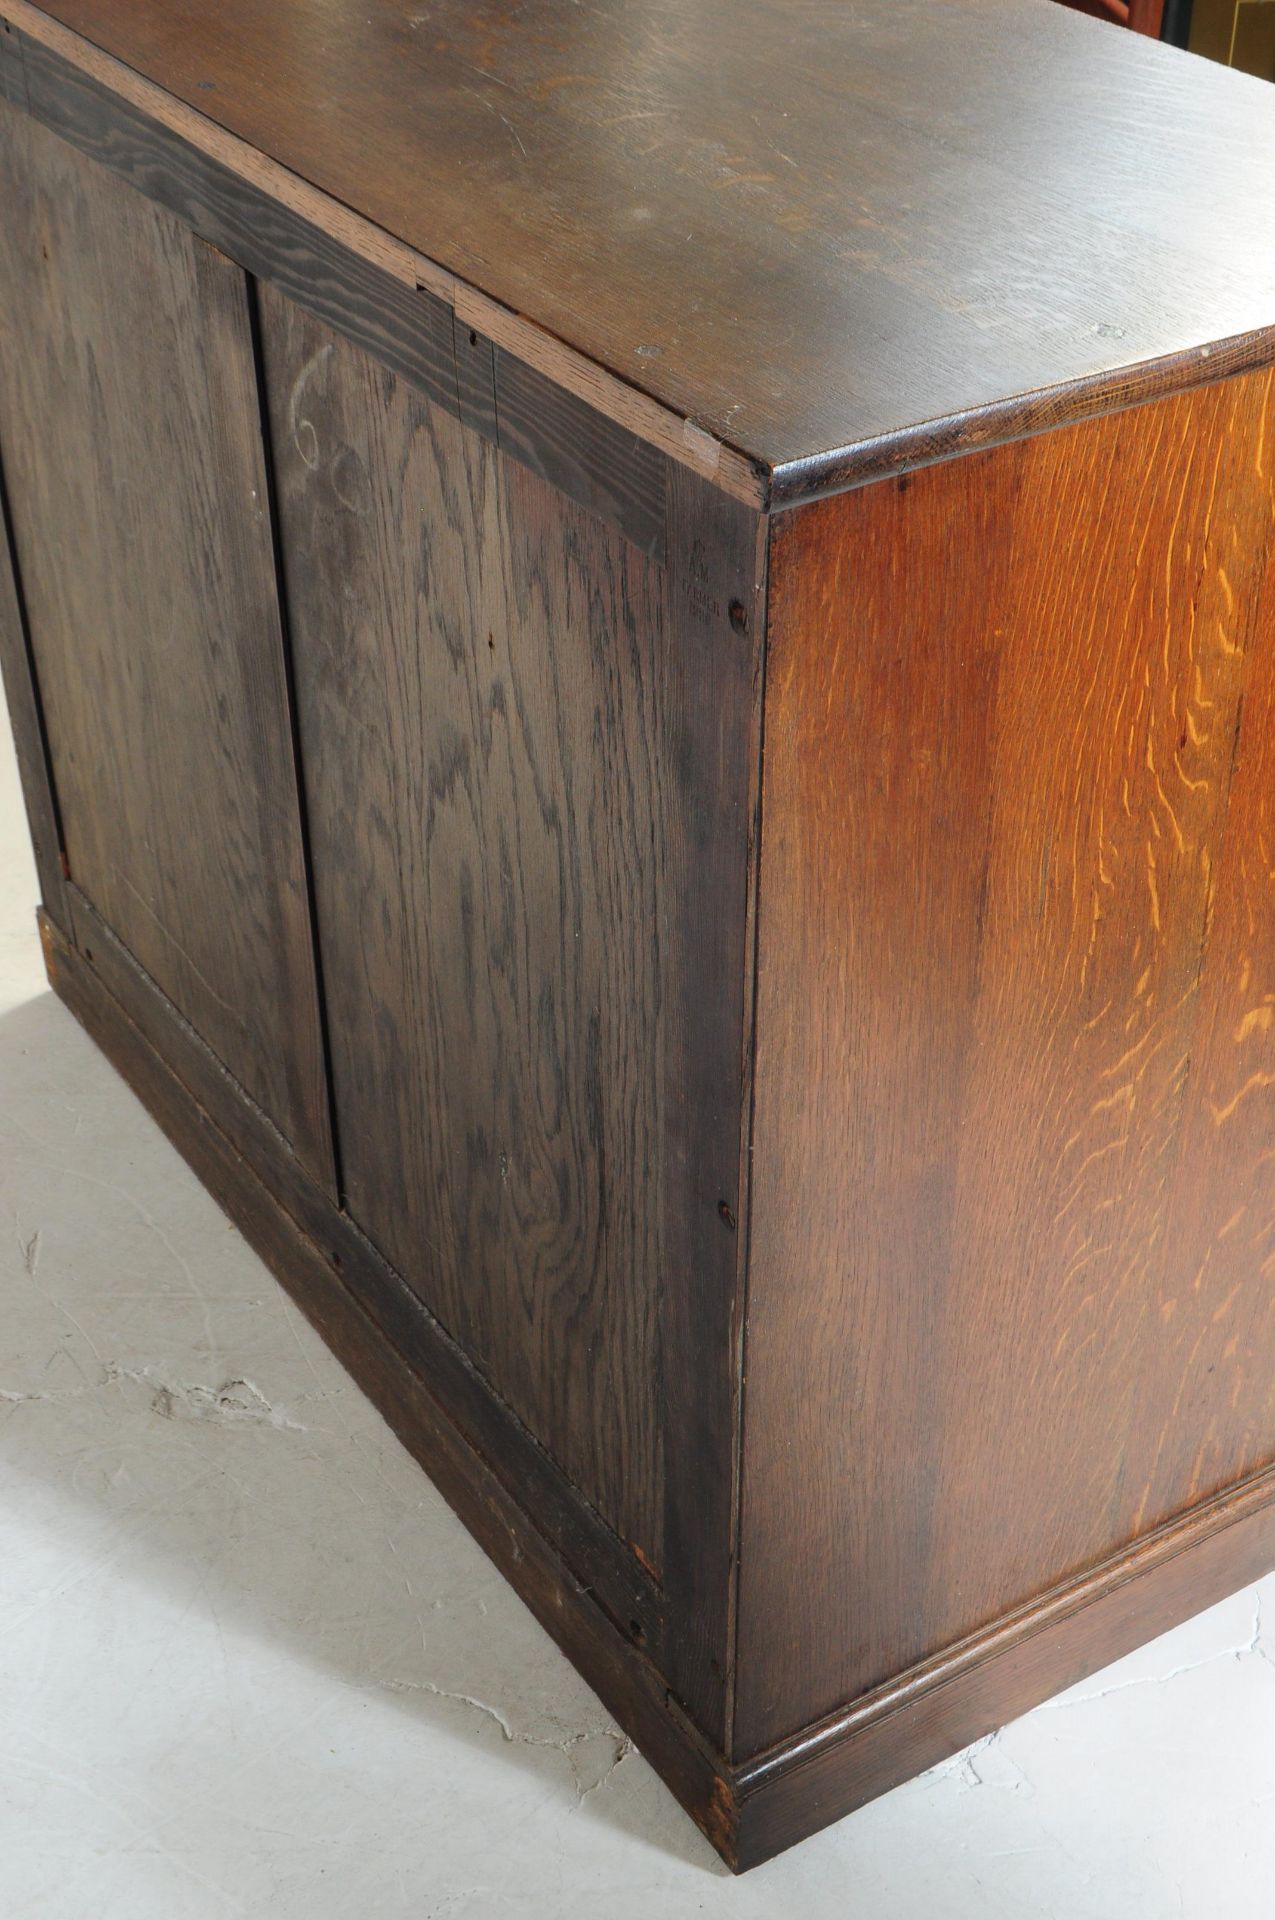 EARLY 20TH CENTURY GEORGE III MANNER OAK CHEST OF DRAWERS - Image 4 of 4